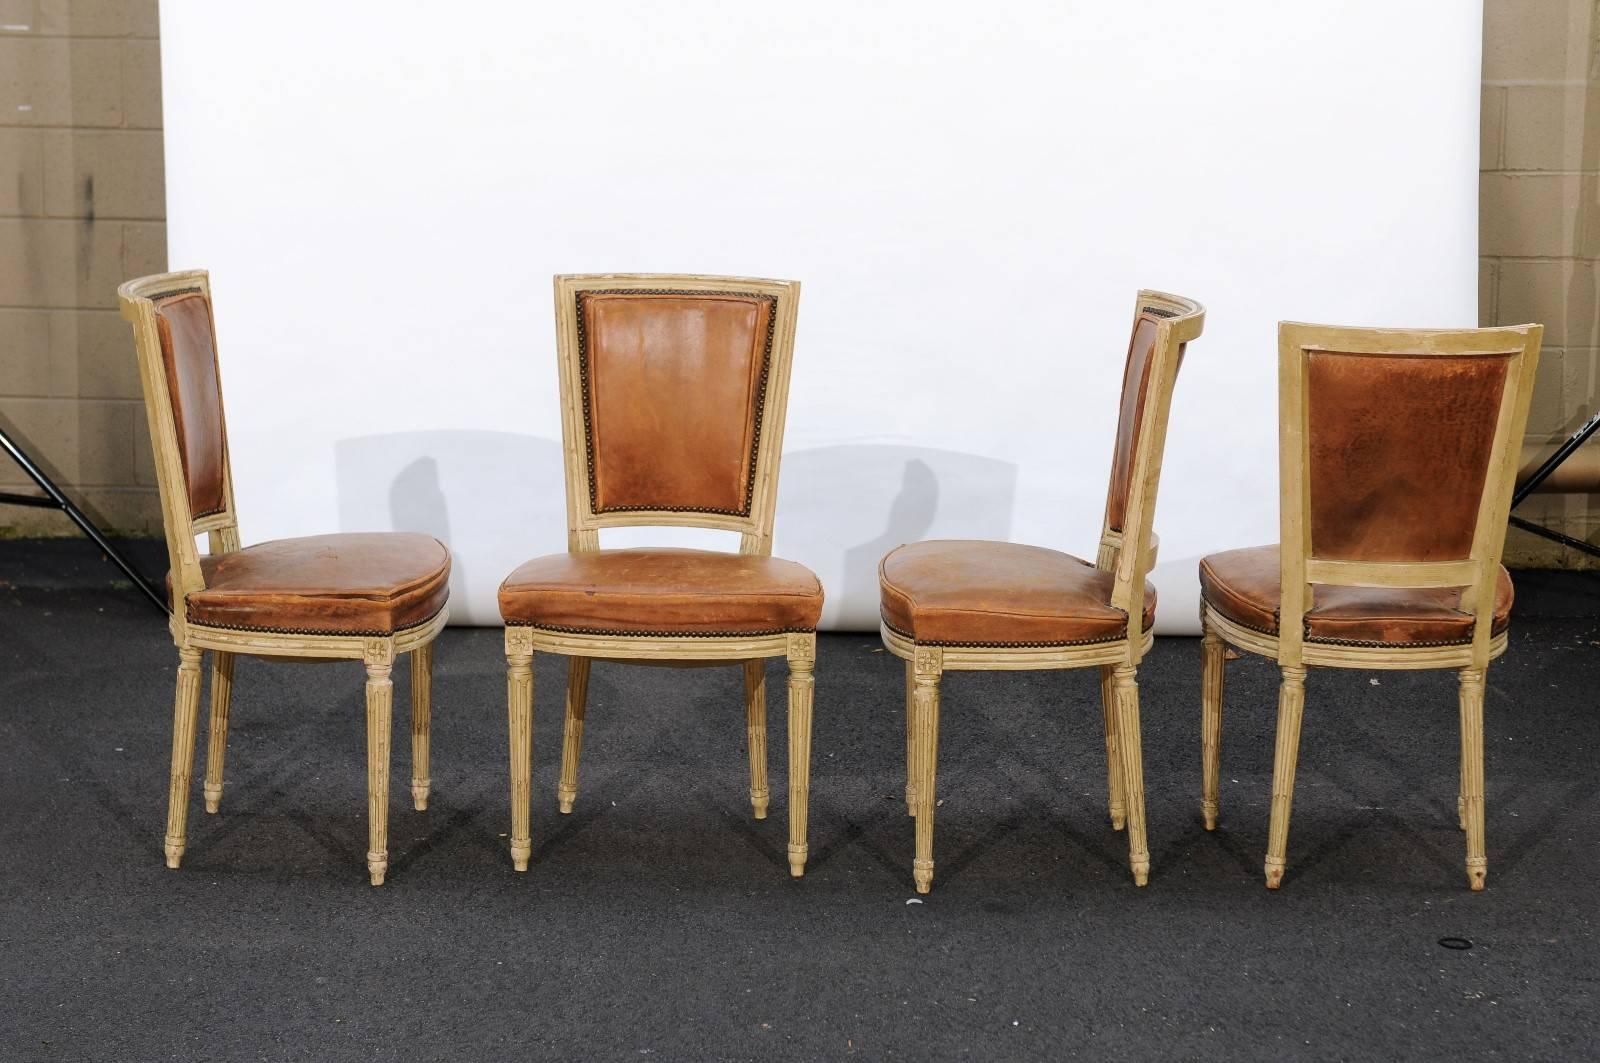 20th Century Set of Four French Louis XVI Style Chairs with Leathers Seats, circa 1950